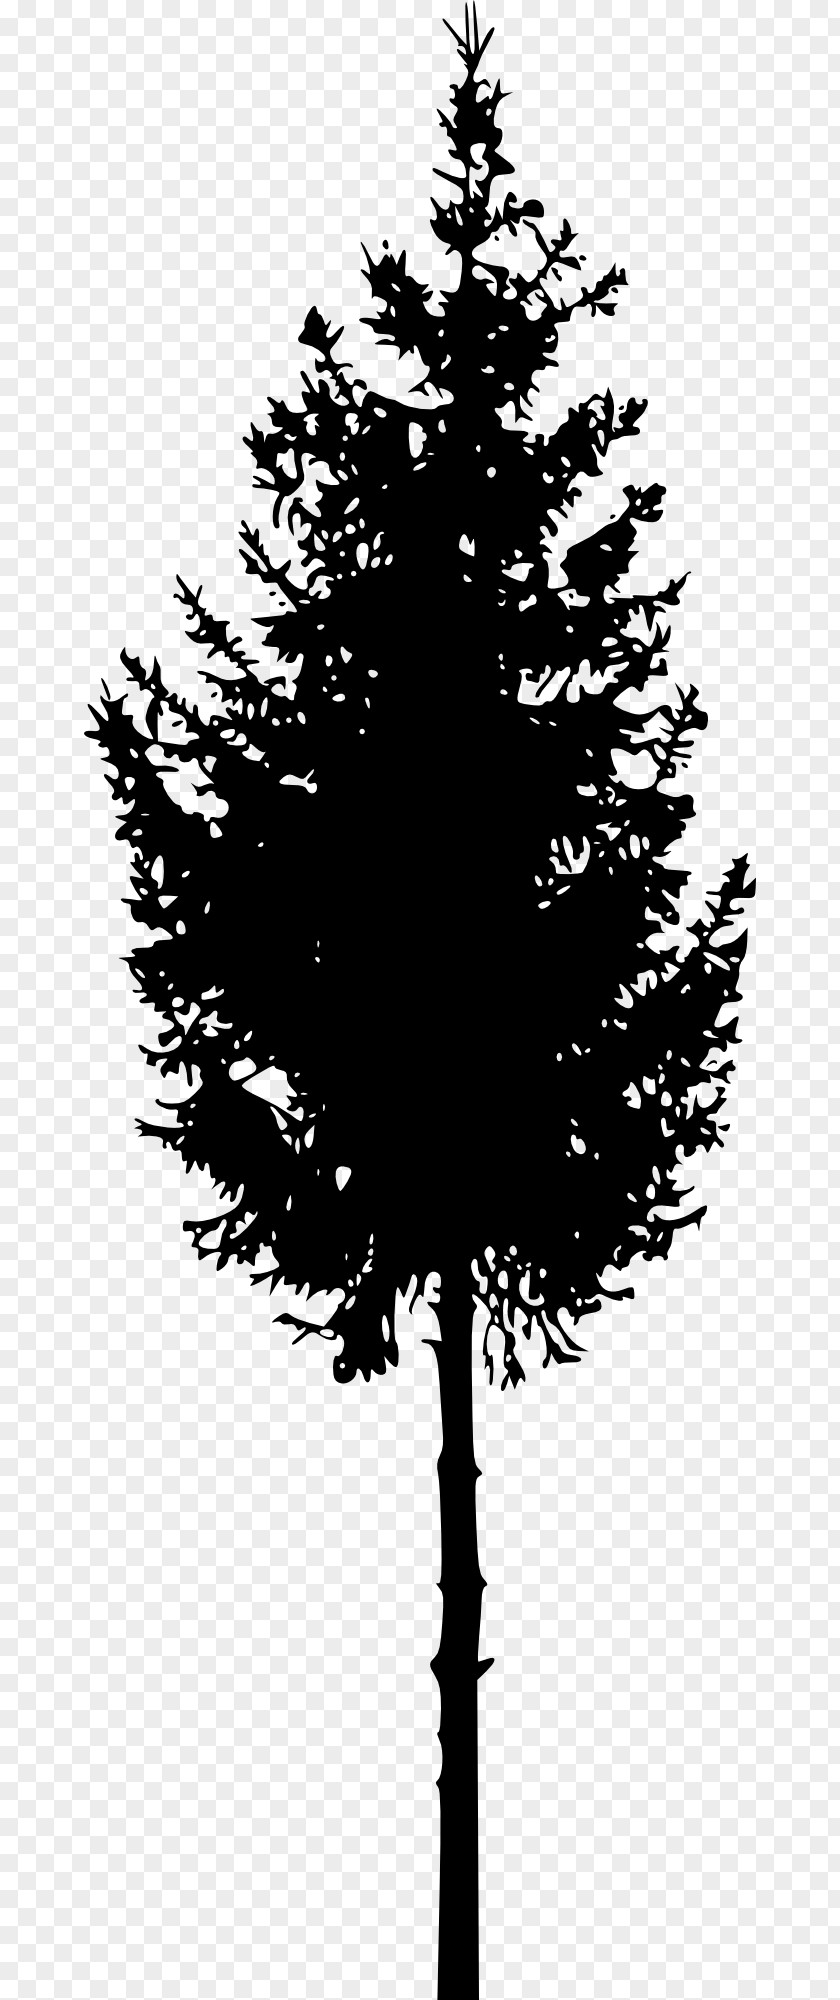 Spear Tree Silhouette Woody Plant Clip Art PNG